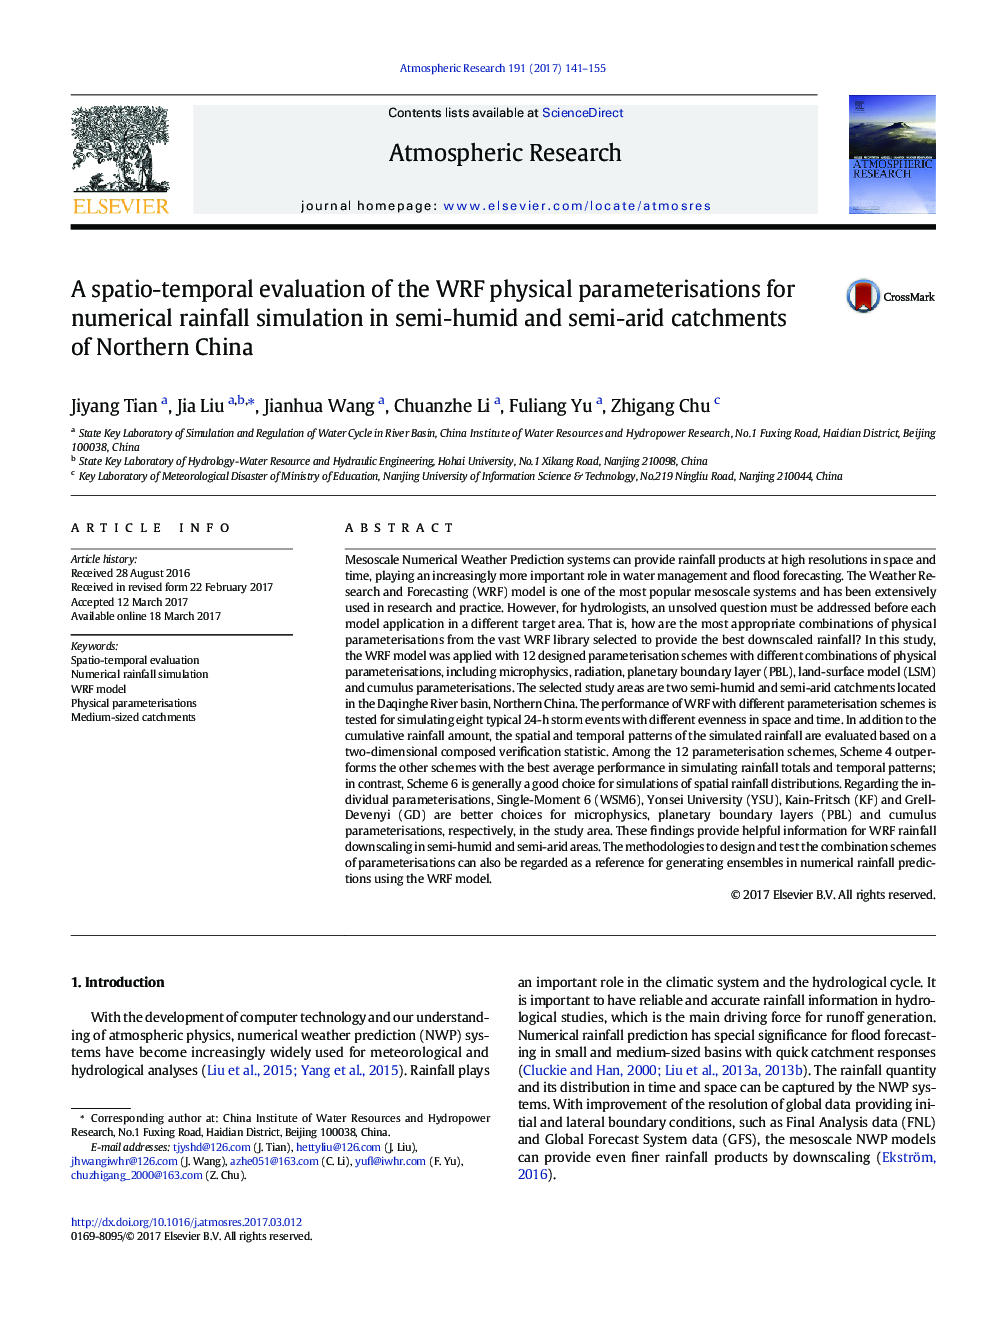 A spatio-temporal evaluation of the WRF physical parameterisations for numerical rainfall simulation in semi-humid and semi-arid catchments of Northern China